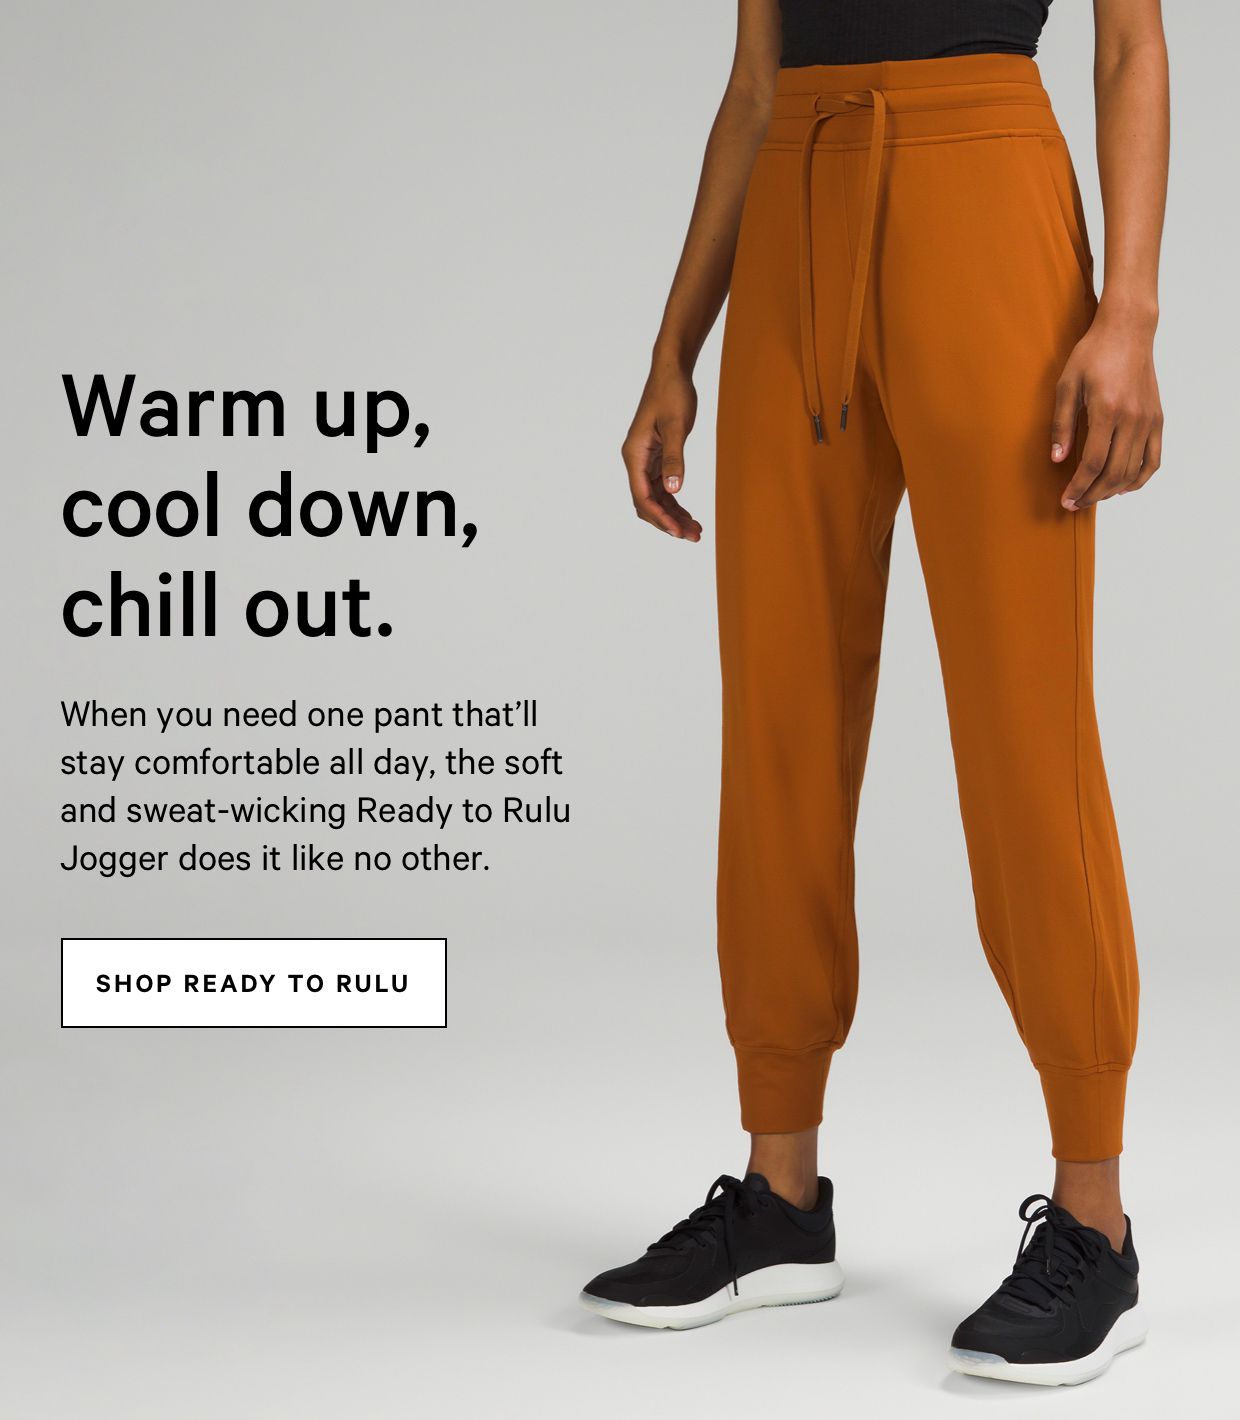 Warm up, cool down, chill out. When you need one pant that'll stay comfortable all day, the soft and sweat-wicking Ready to Rulu Jogger does it like no other. SHOP READY TO RULU 